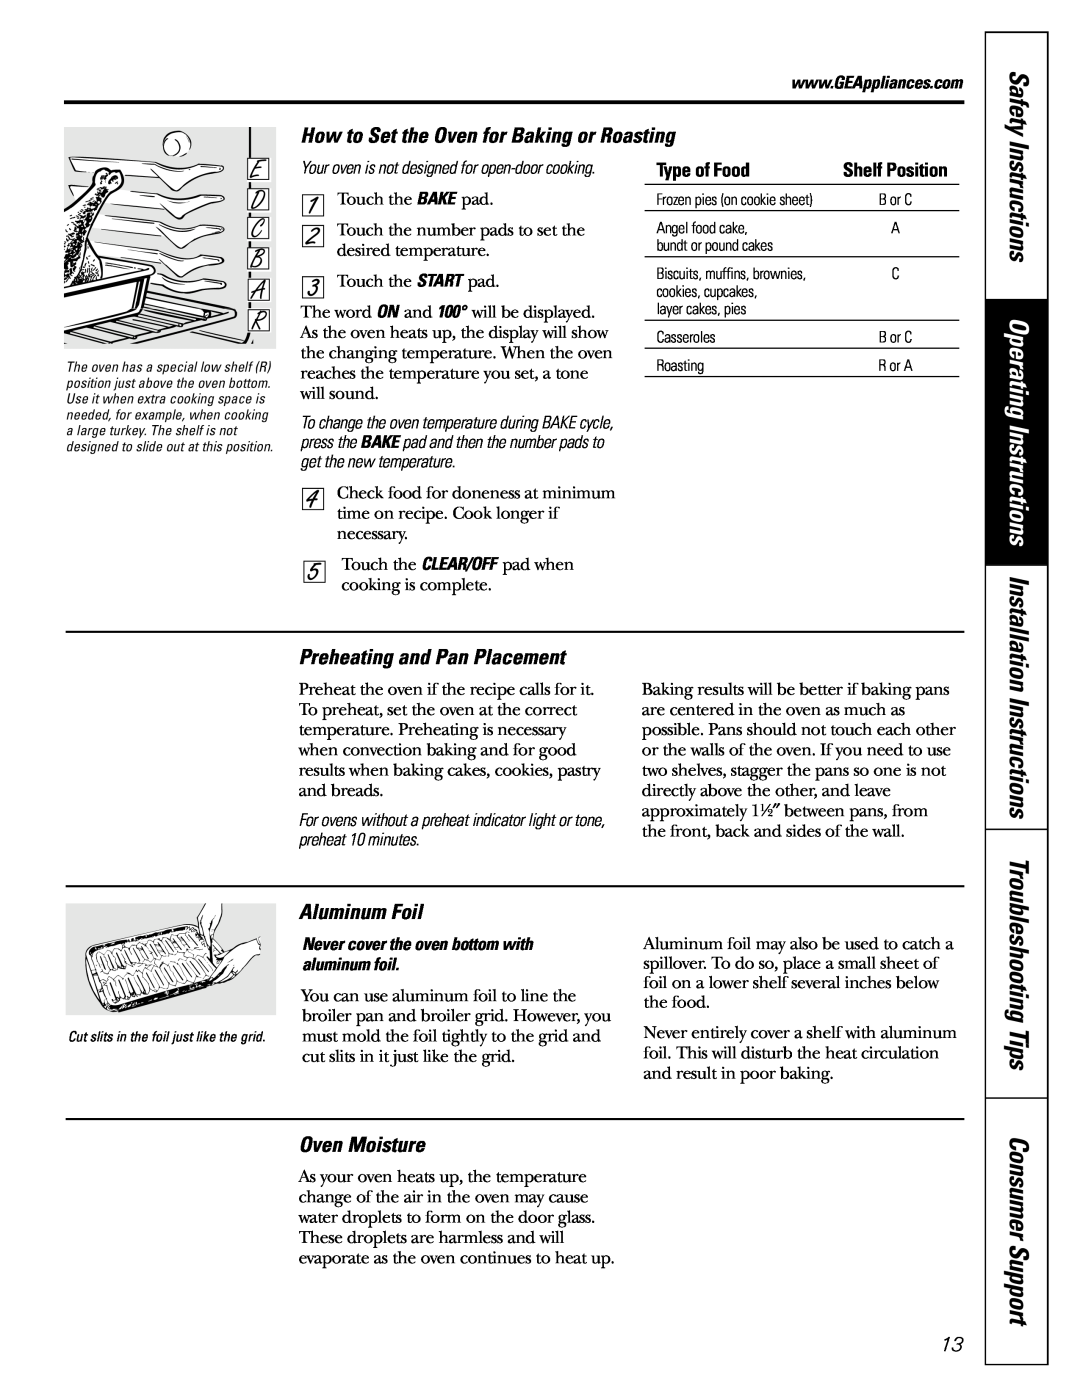 GE JGB920 Instructions Operating Instructions, How to Set the Oven for Baking or Roasting, Preheating and Pan Placement 